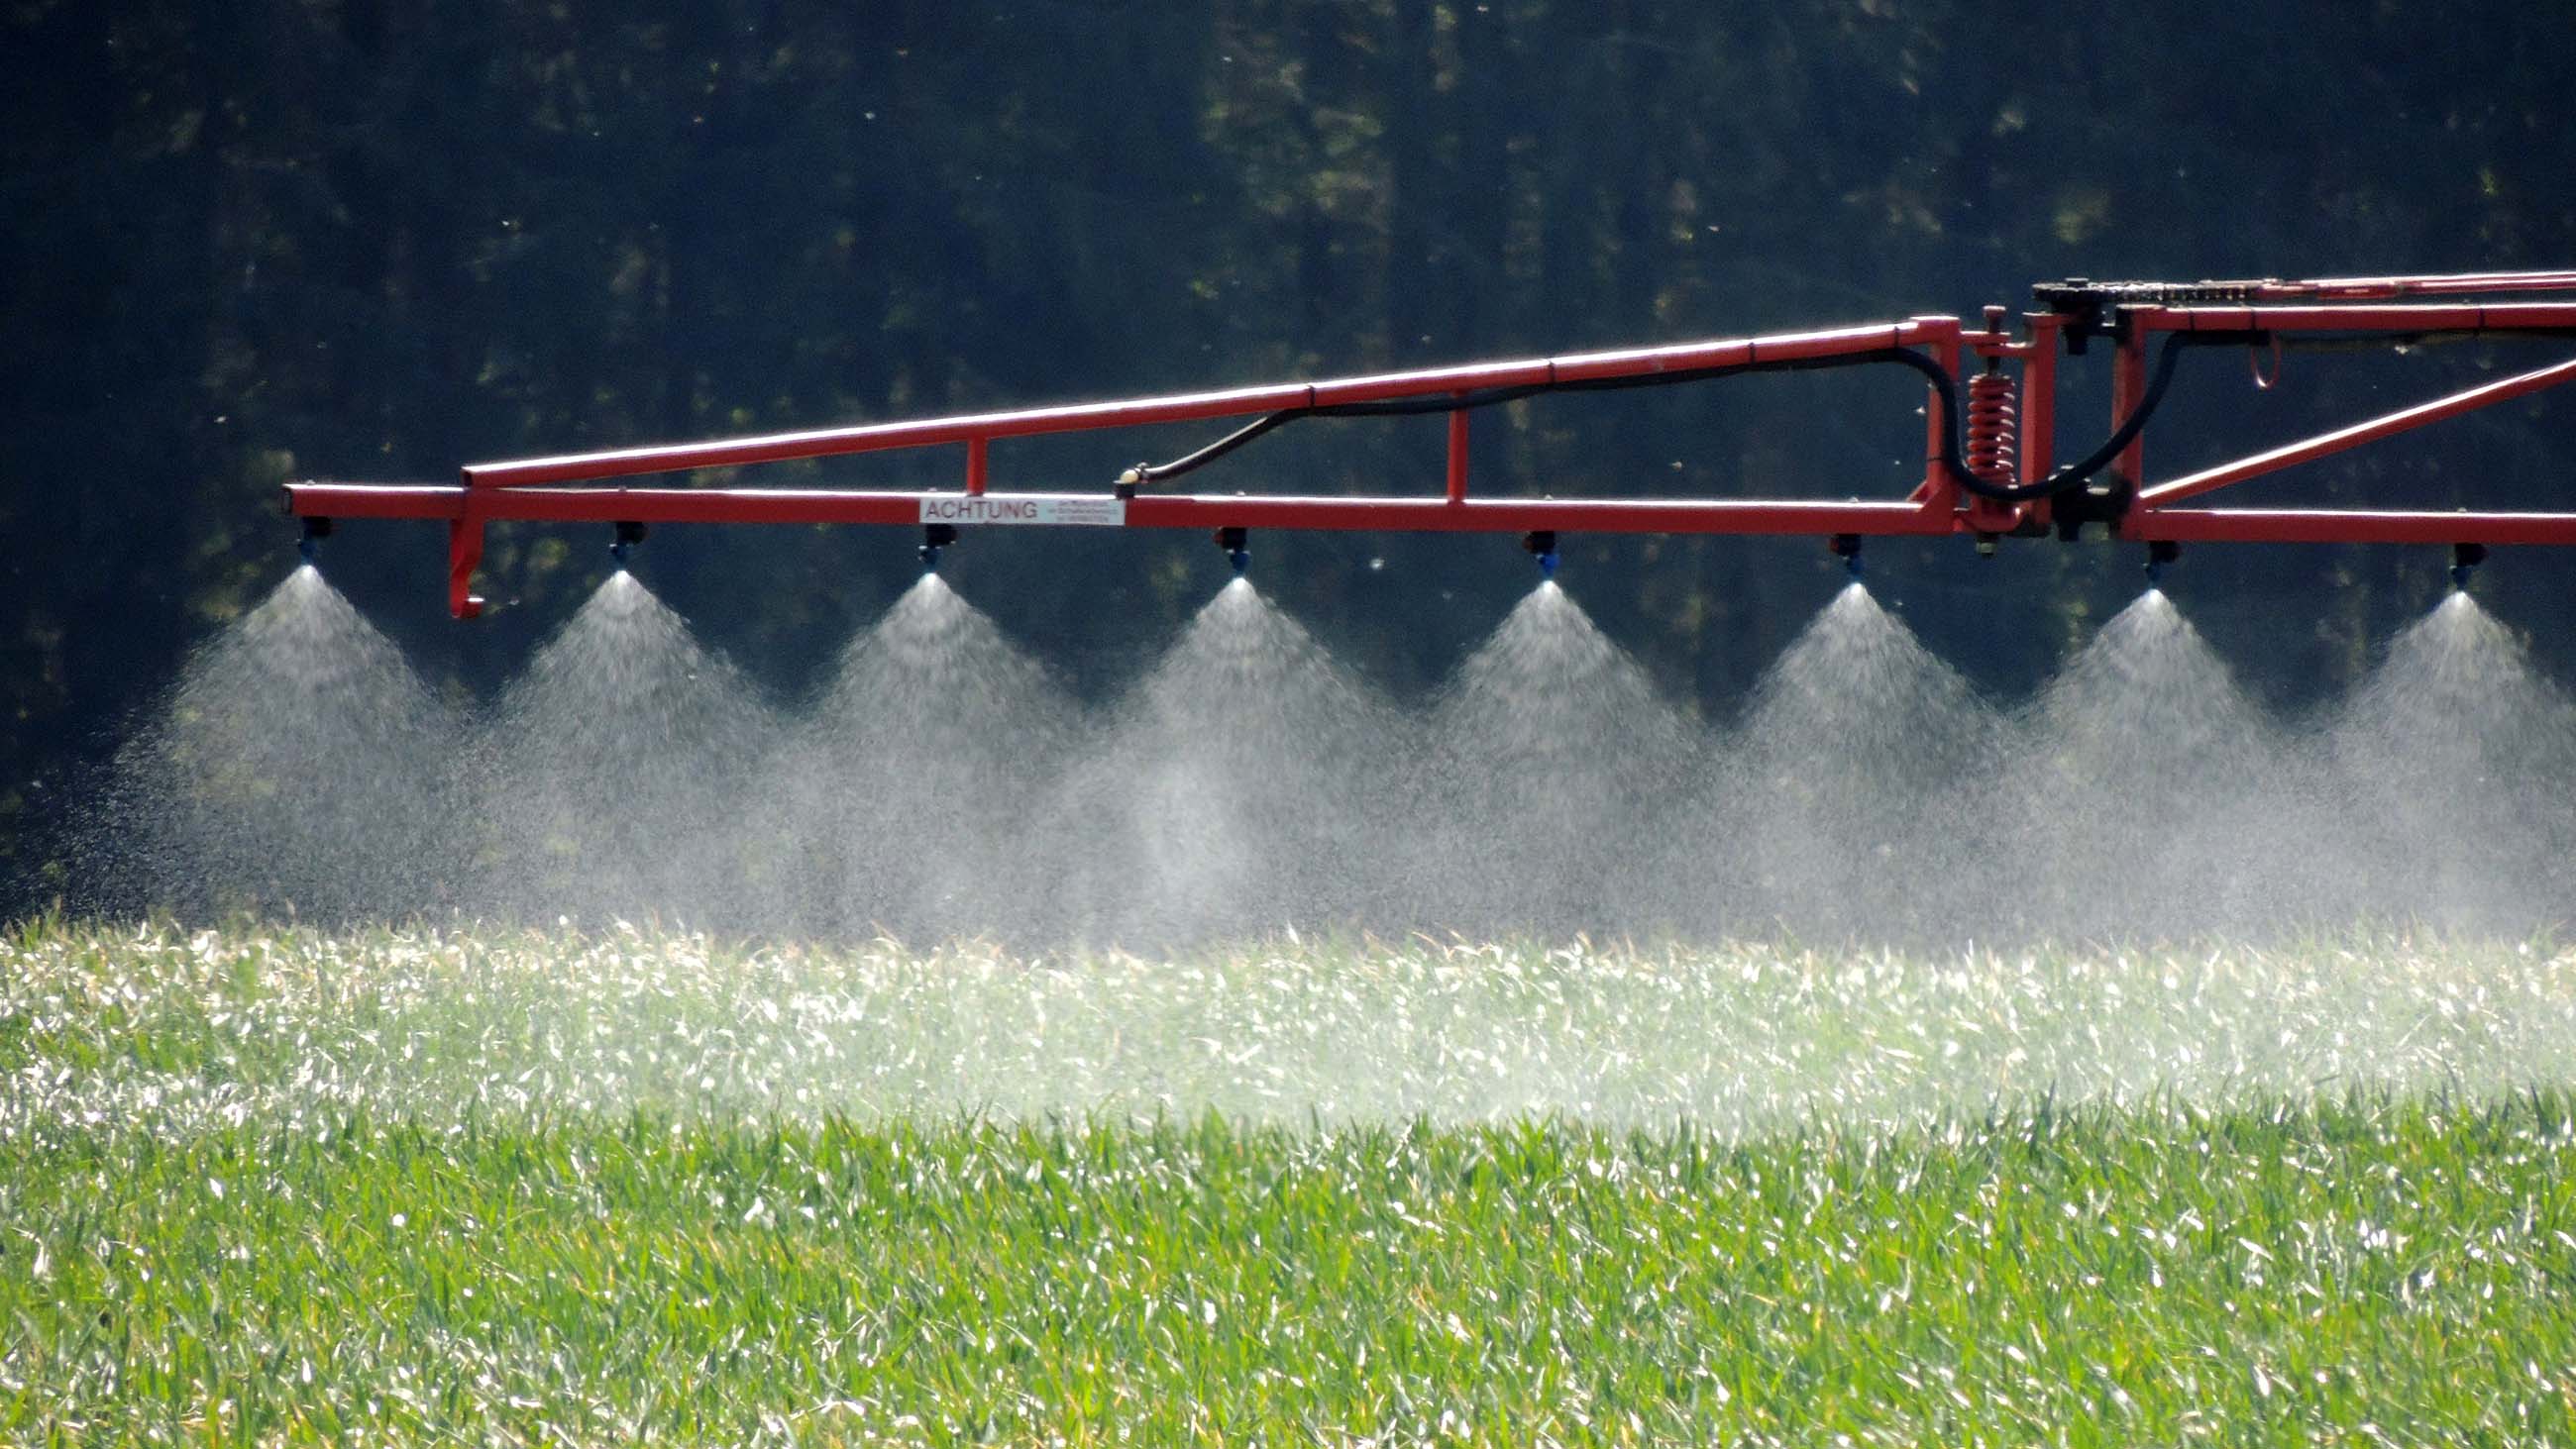 GMOs were supposed to reduced the need for pesticides. A new study suggests just the opposite.